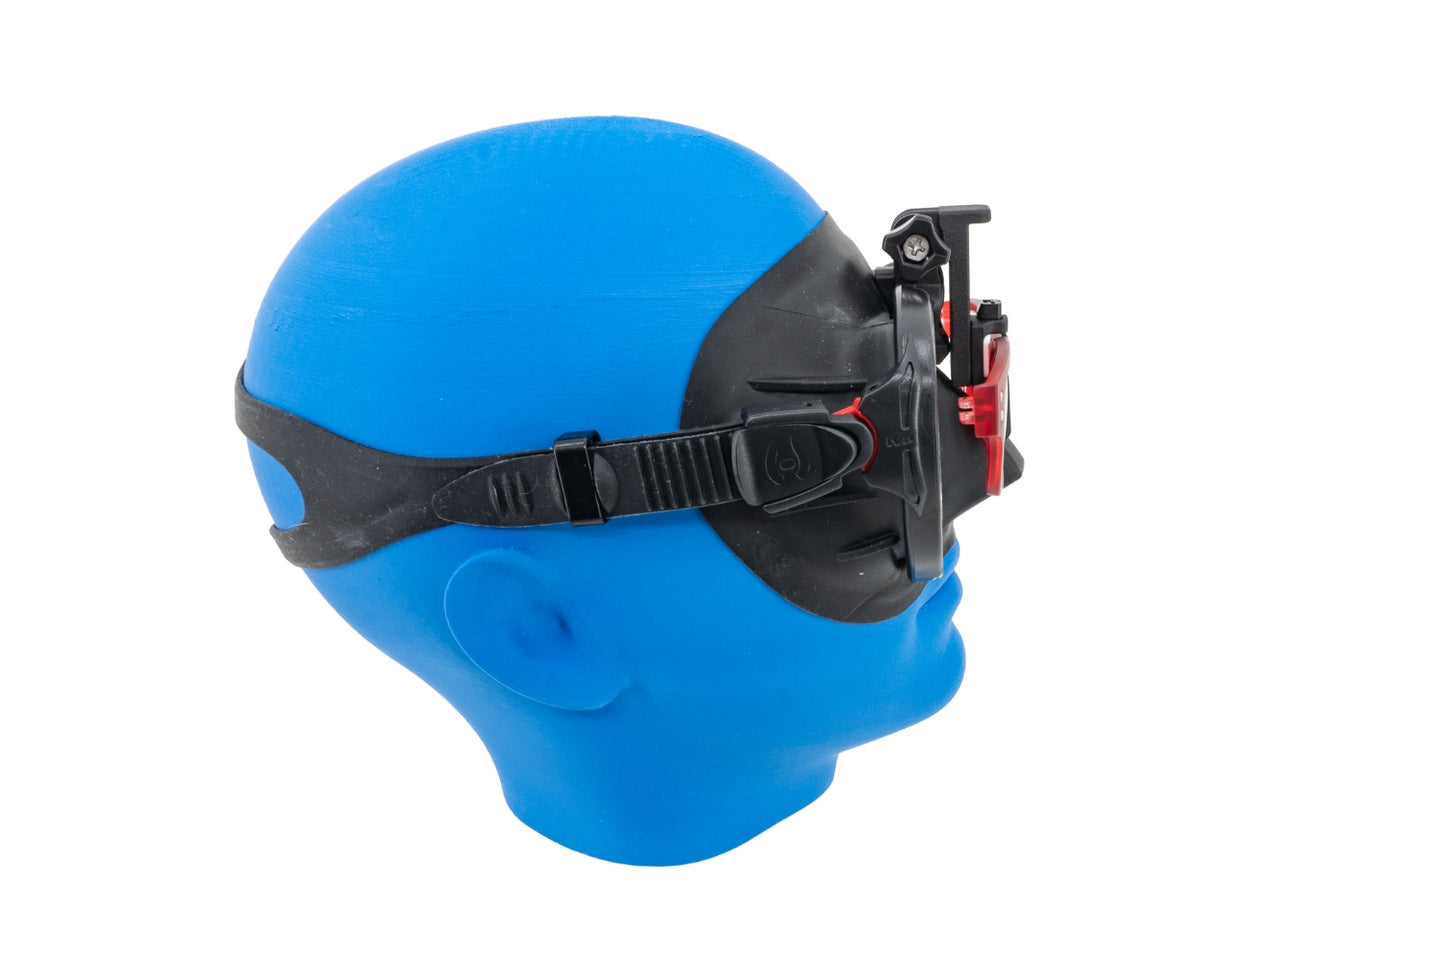 DiveVue - Mount glasses to your dive mask.